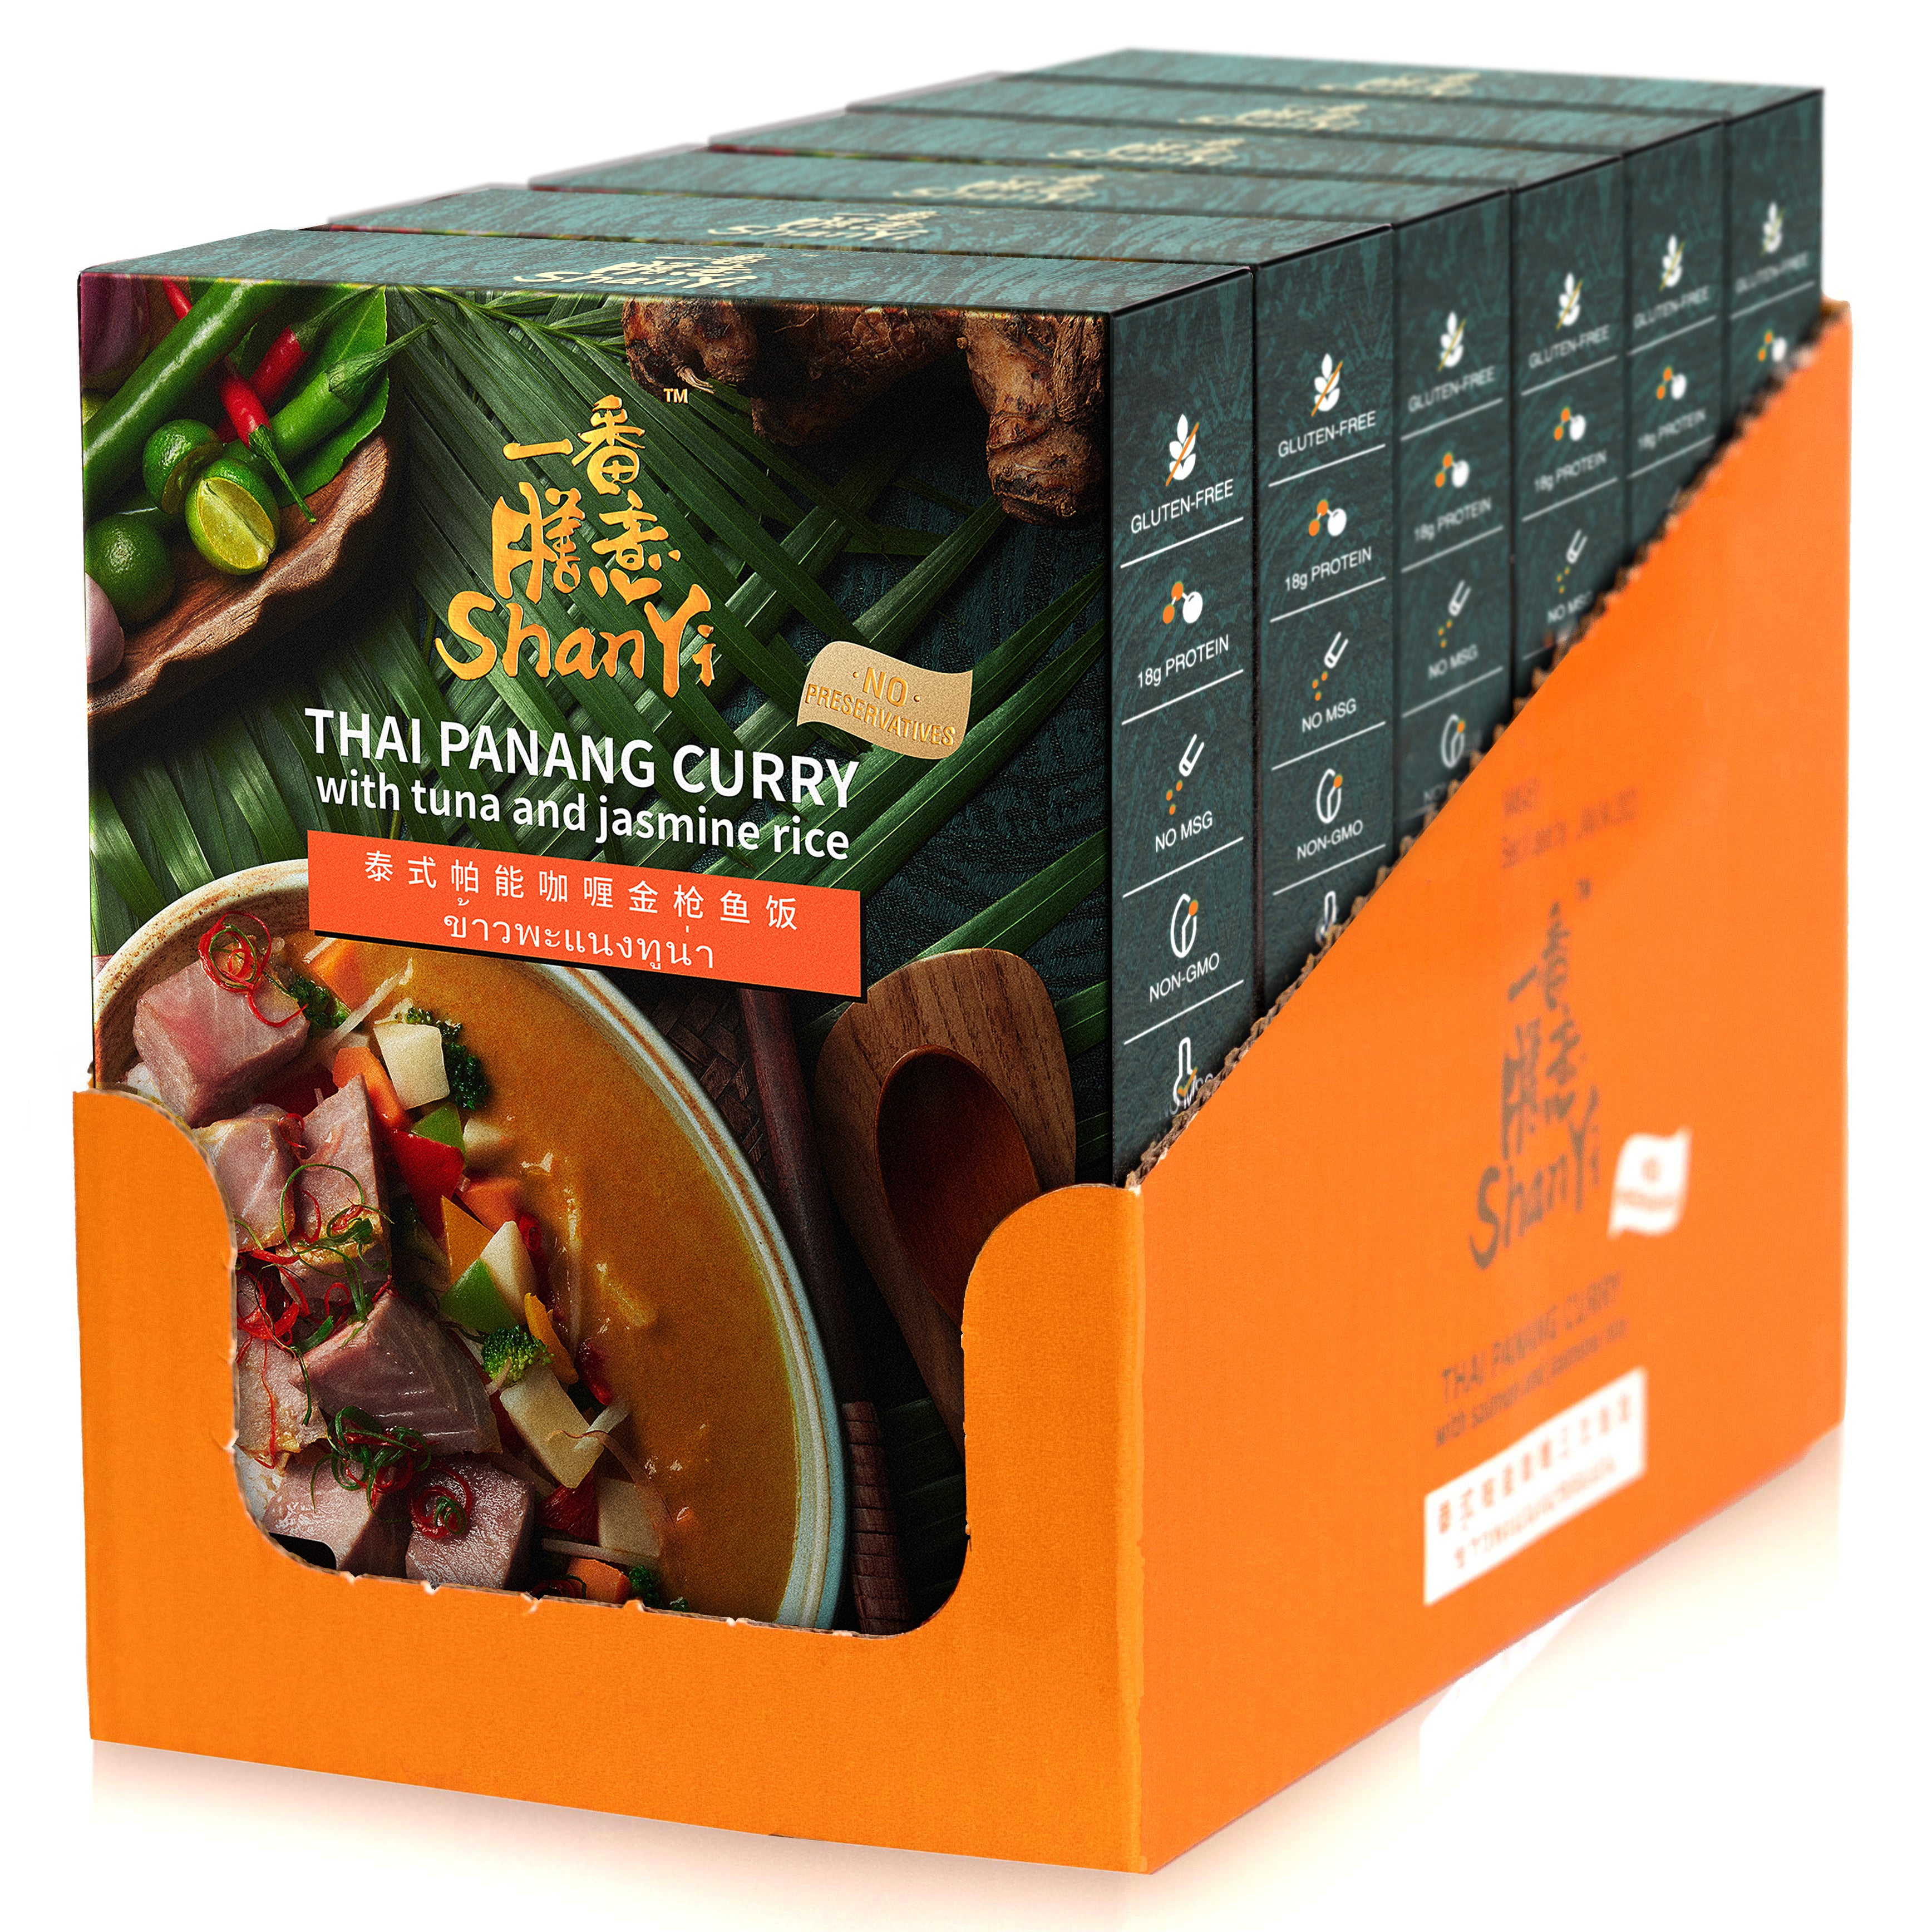 ShanYi Instant Microwave Meals Ready to Eat, 380g/13oz, Thai Panang Curry with Tuna and Jasmine Rice, Prepared Foods, Case of 6